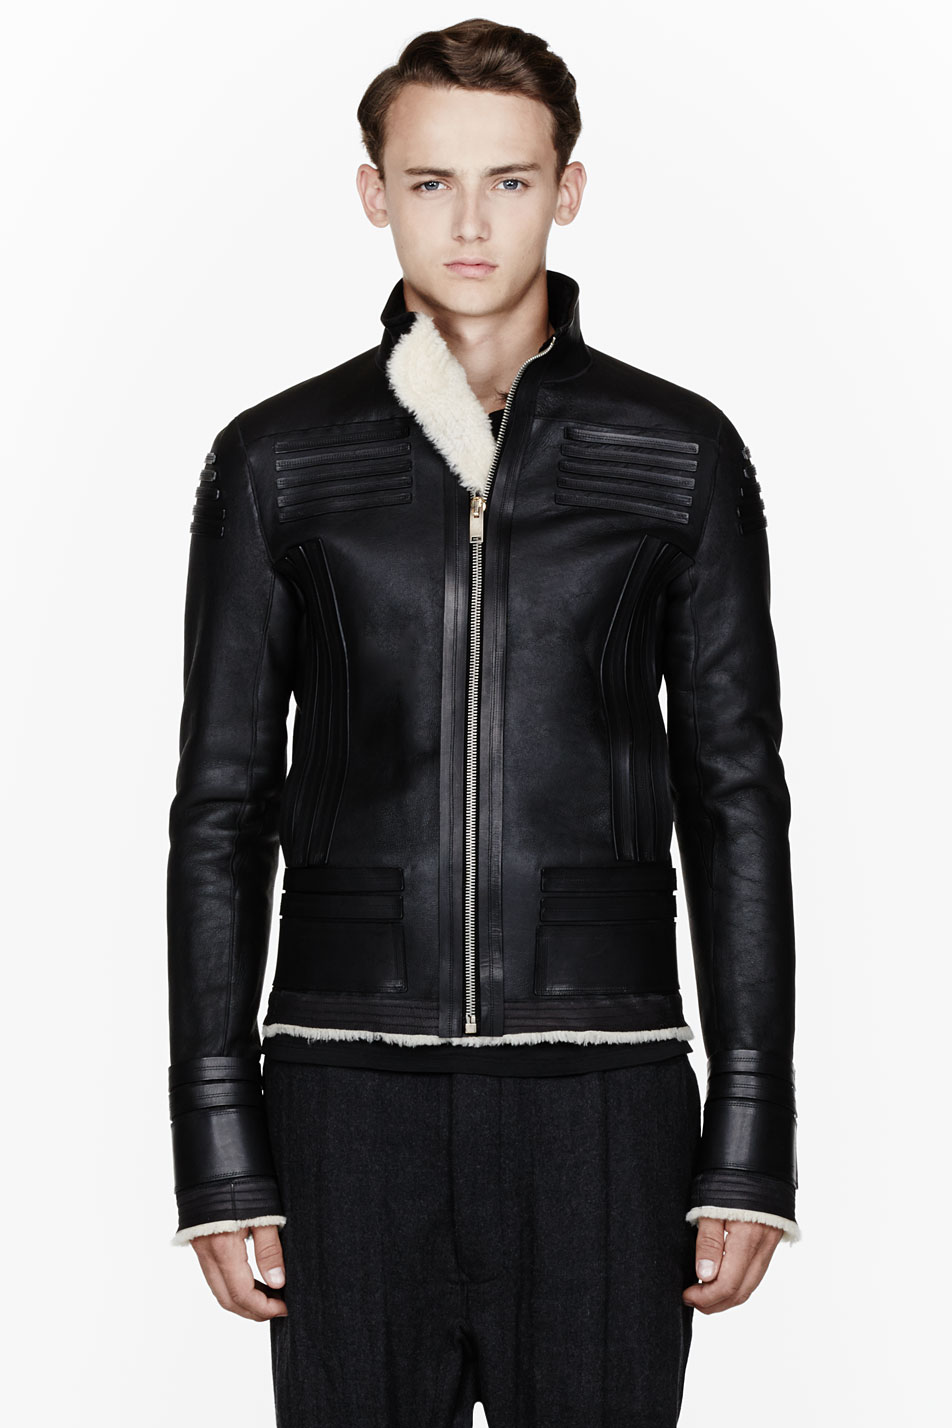 Lyst - Rick owens Black Leather and Shearling Slatted Biker Jacket in ...